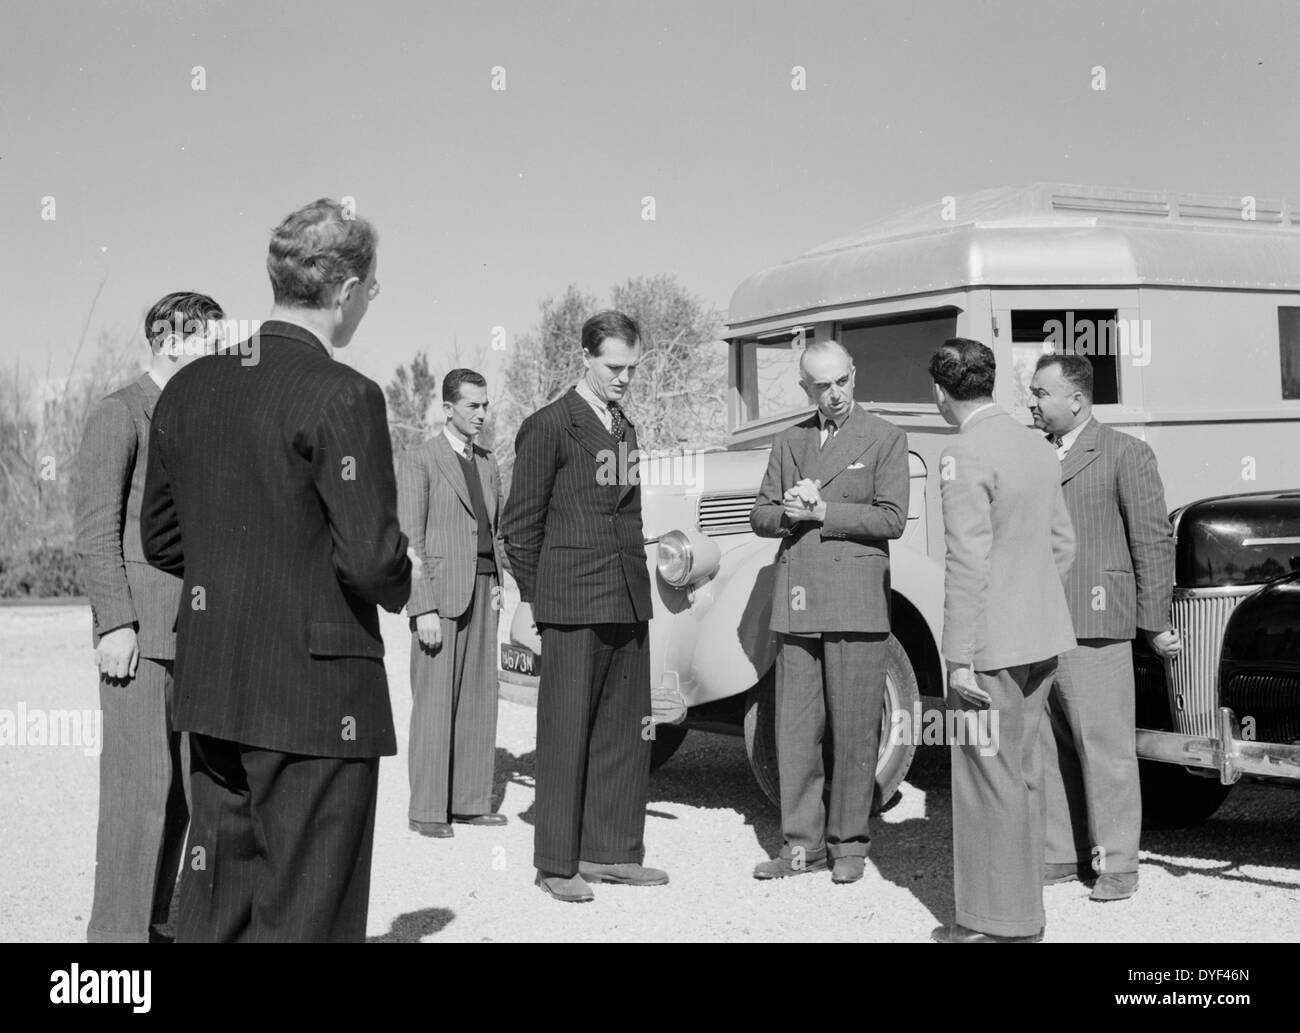 Inspection by His Excellency, the High Commissioner of Cinema, and the High Commissioner talking with members of the crew 1942. Stock Photo